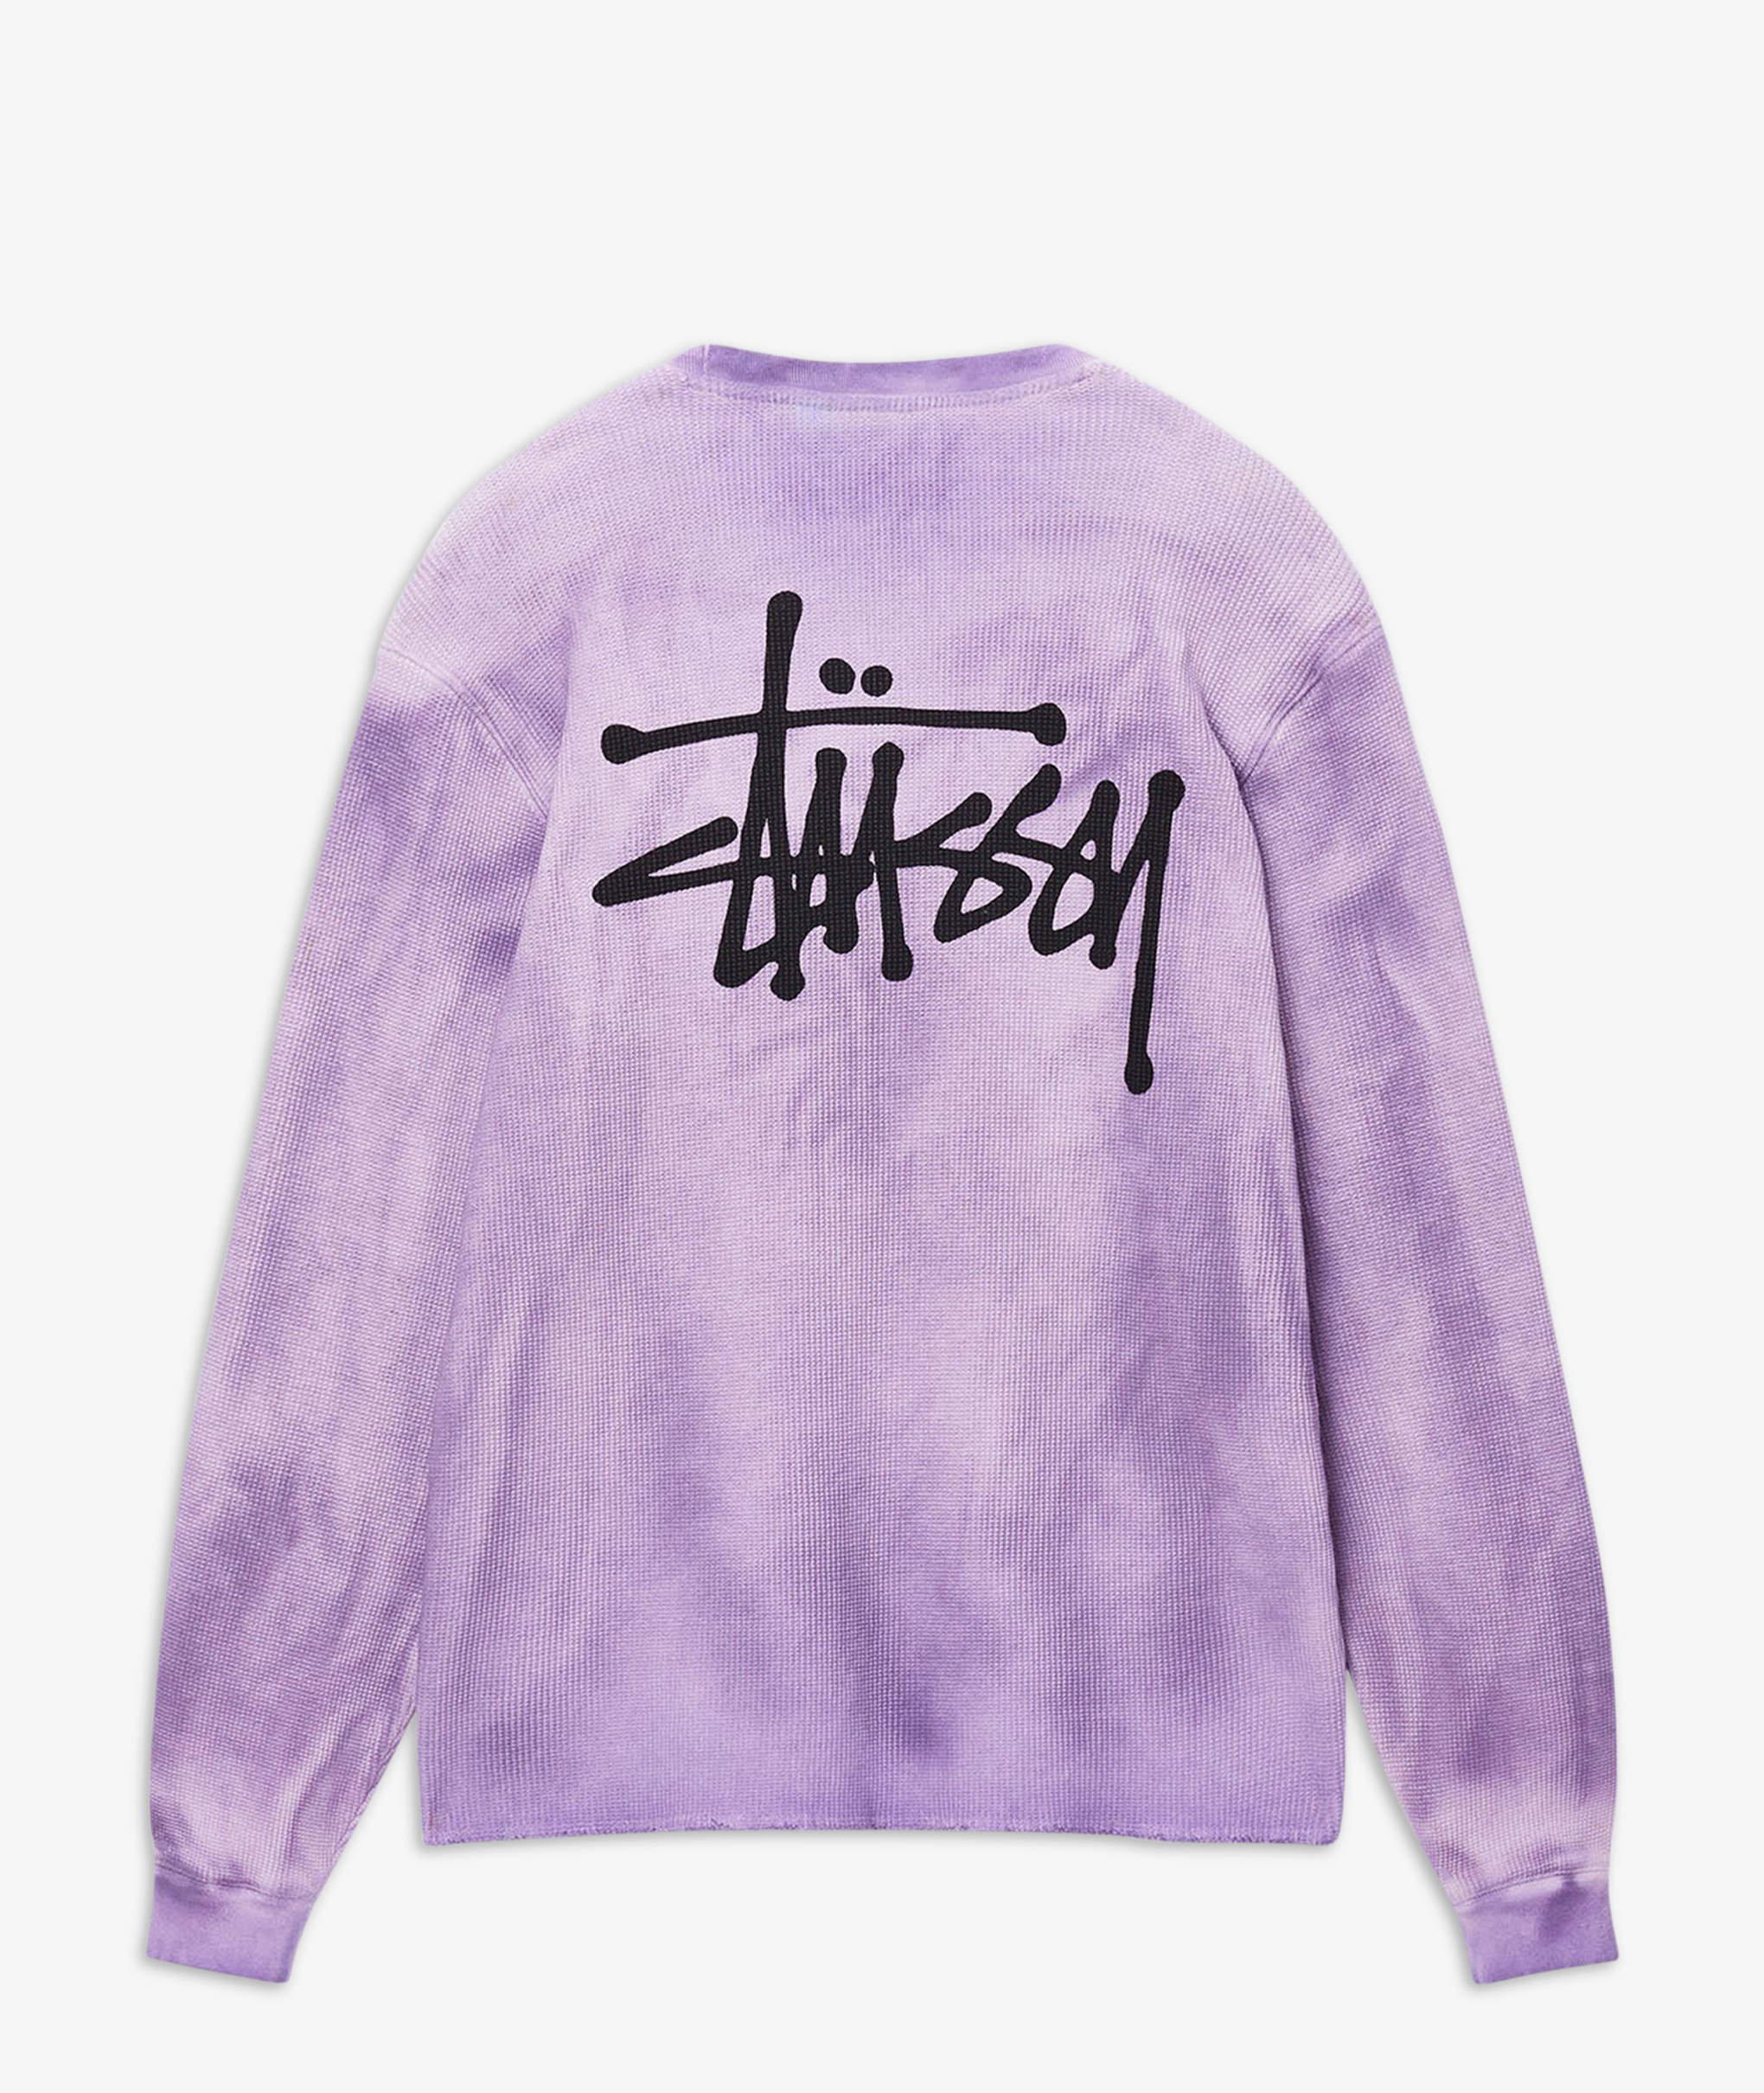 Norse Store | Shipping Worldwide - Stüssy Basic Stock LS Thermal